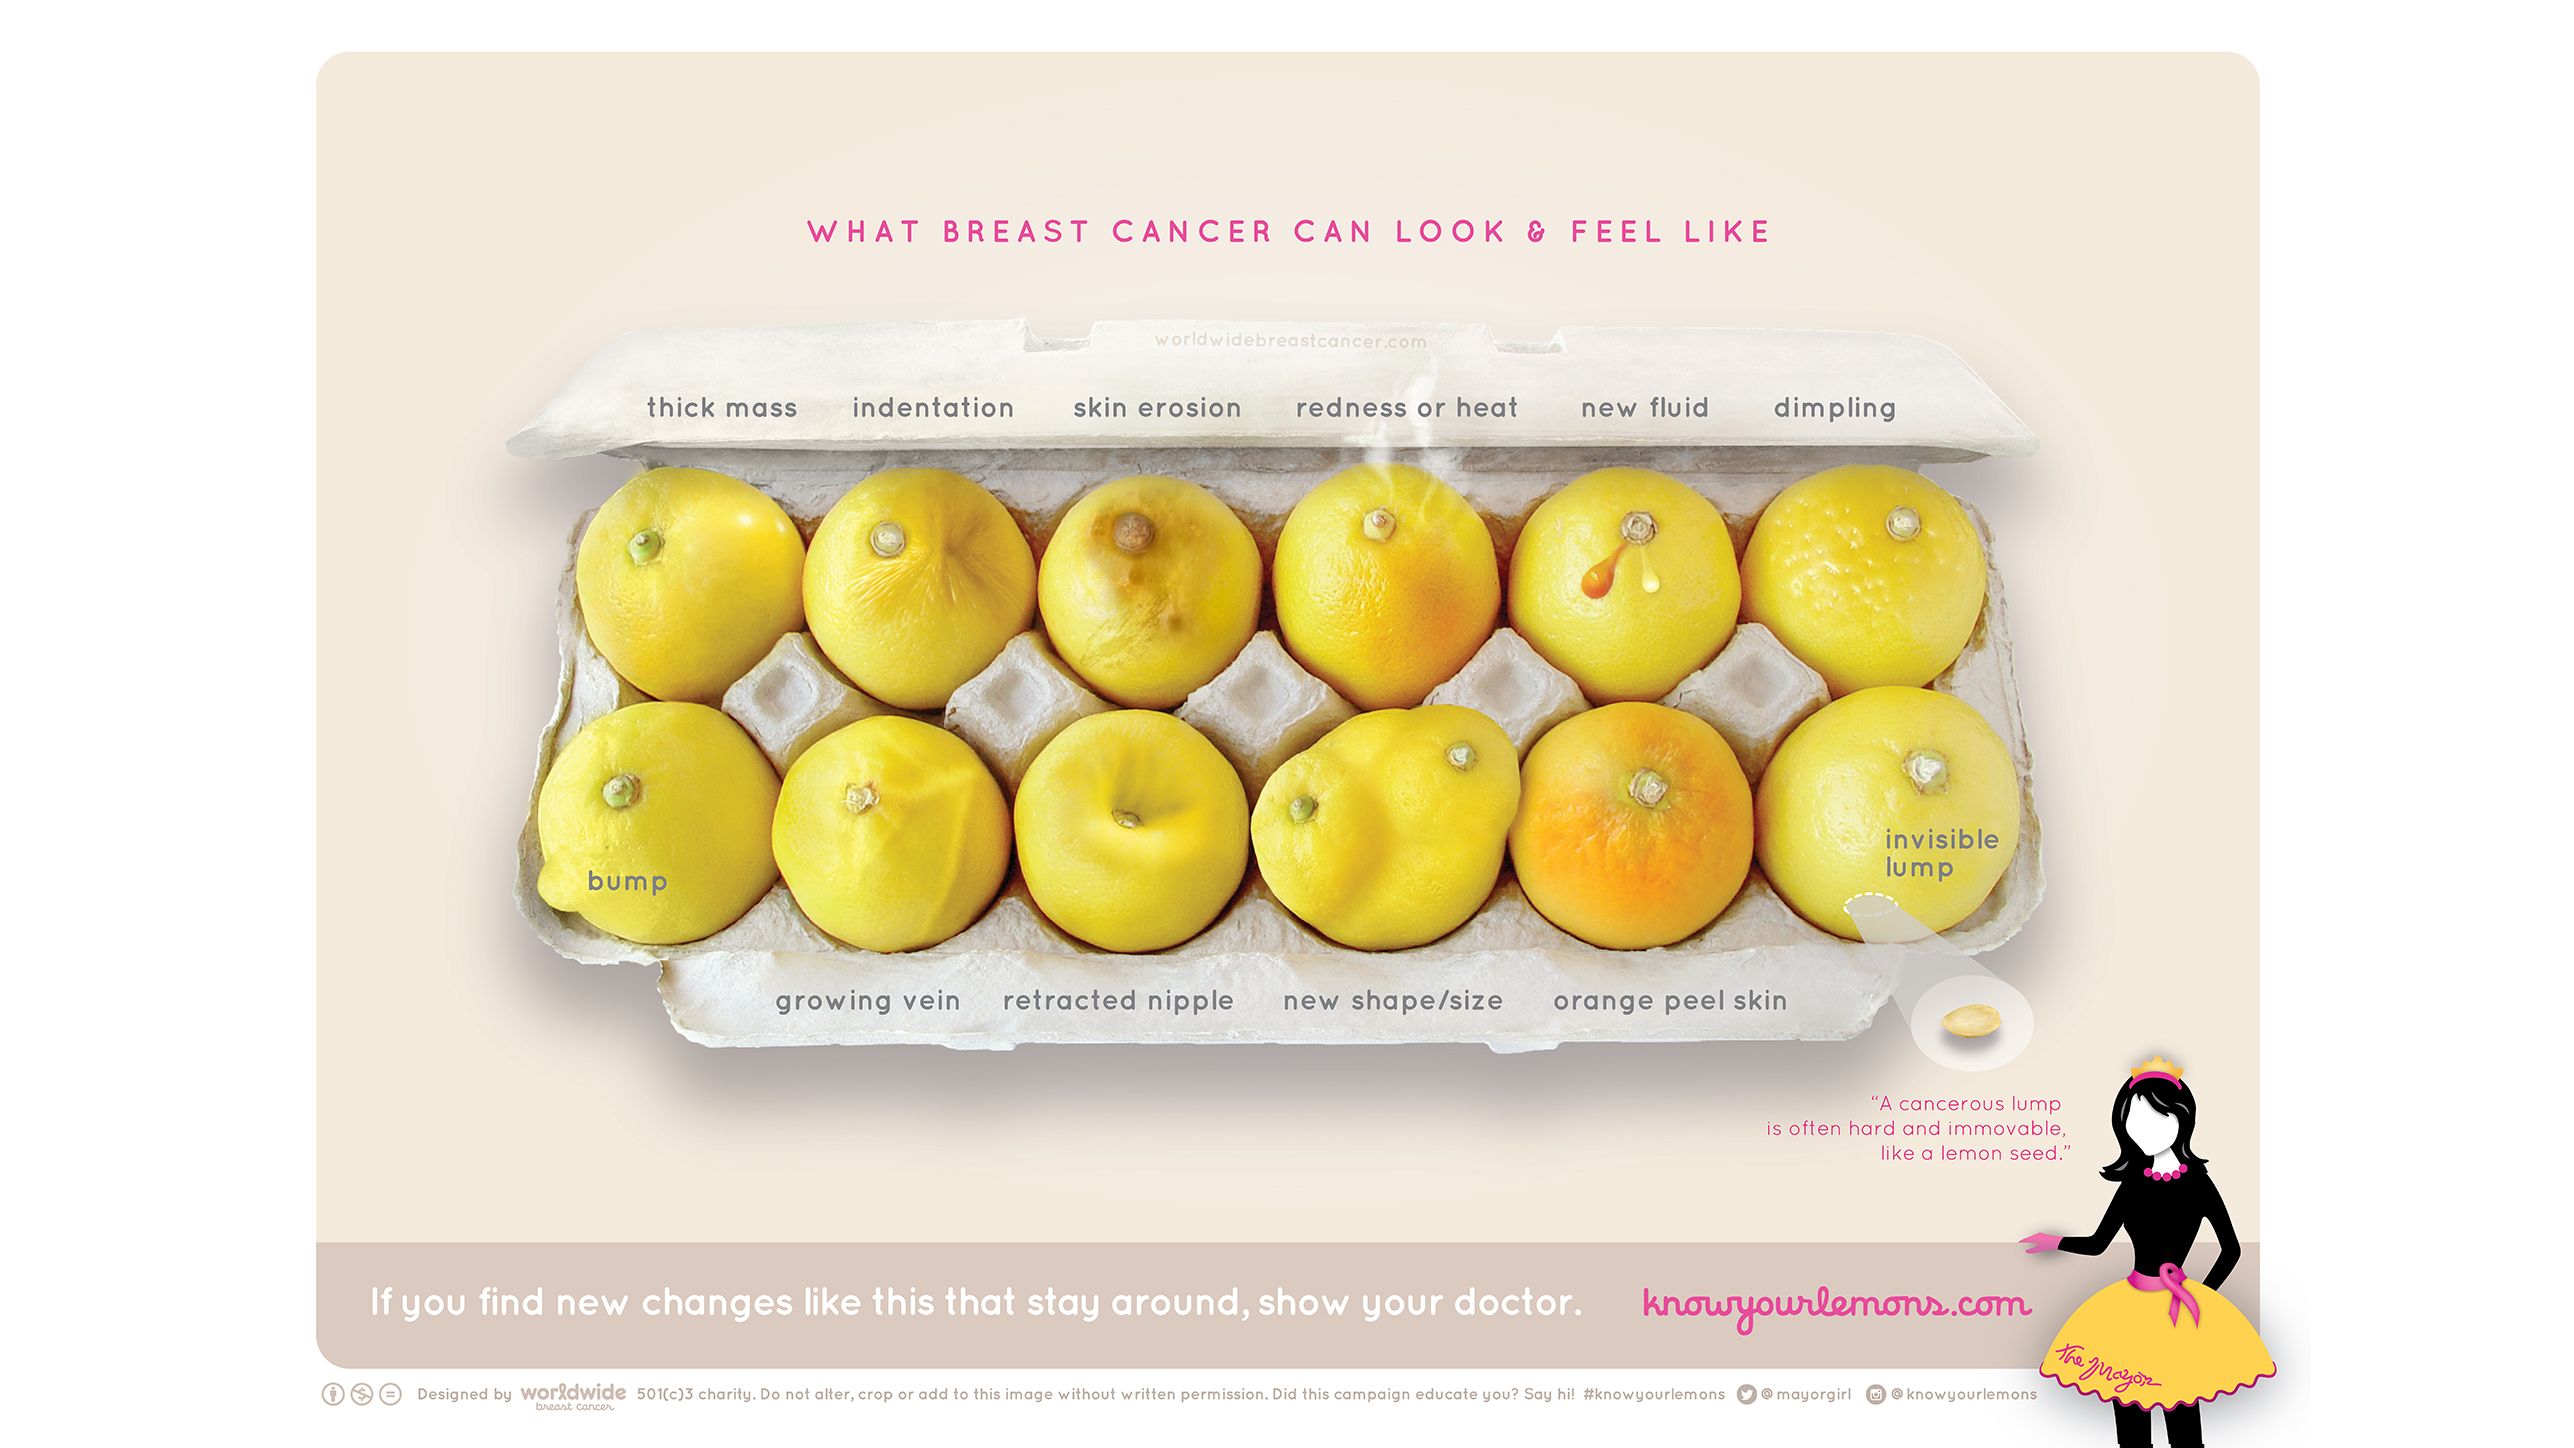 Indent Girl S Video Xxx - Carton of lemons offers simple lesson about breast cancer | CNN